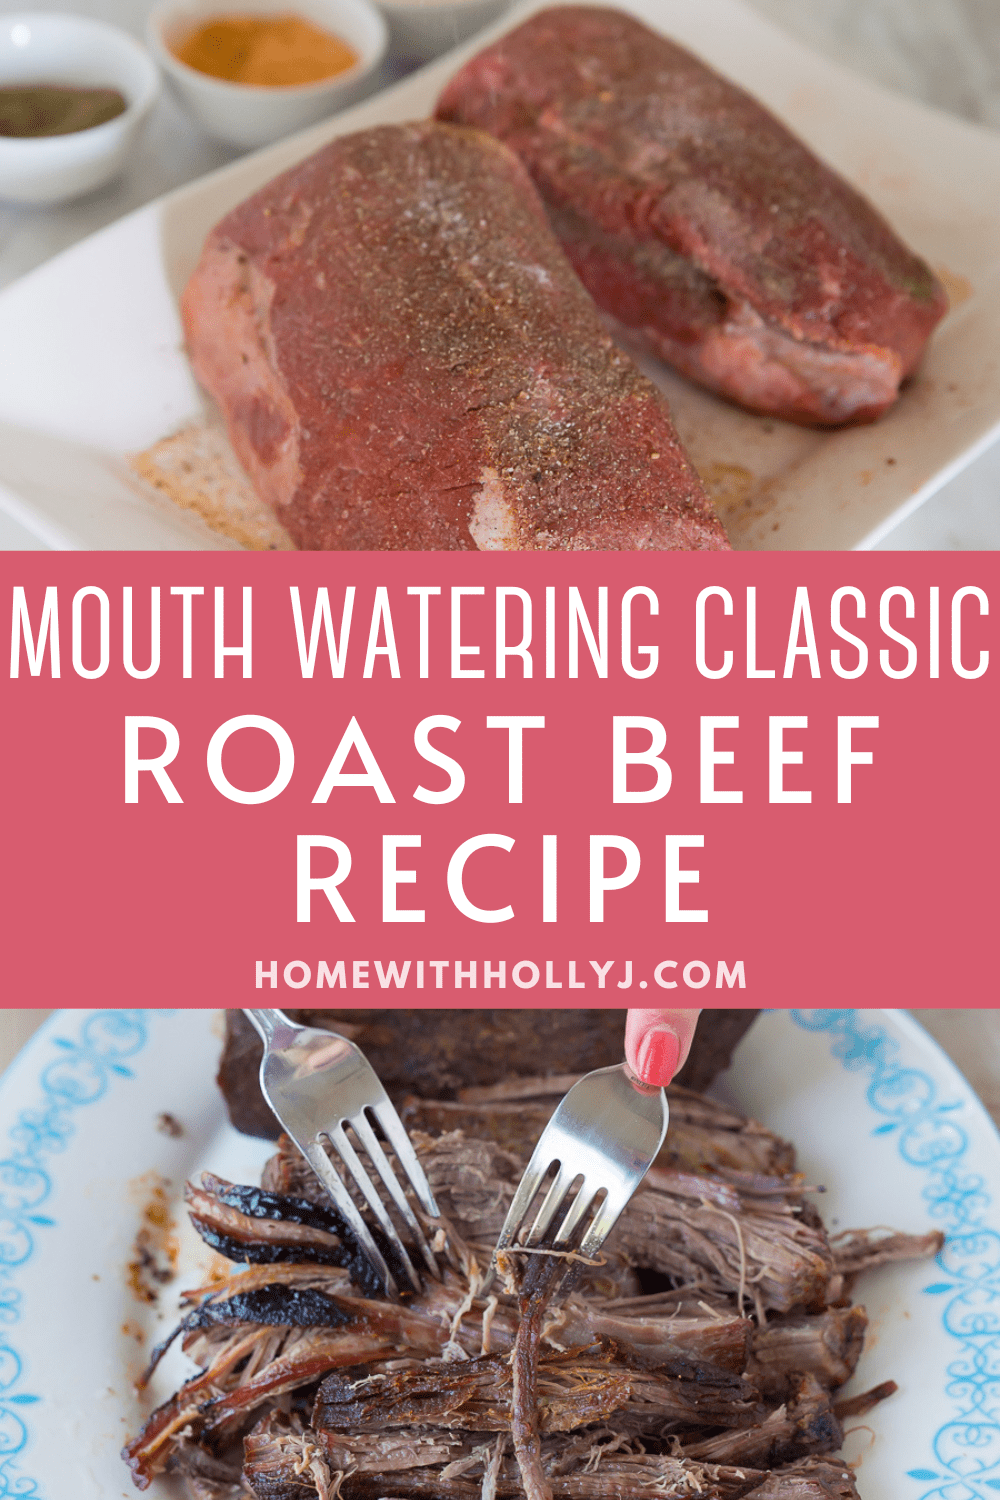 Looking for a delicious classic roast beef recipe? Look no further! Use this easy-to-follow recipe that will leave your taste buds wanting more.